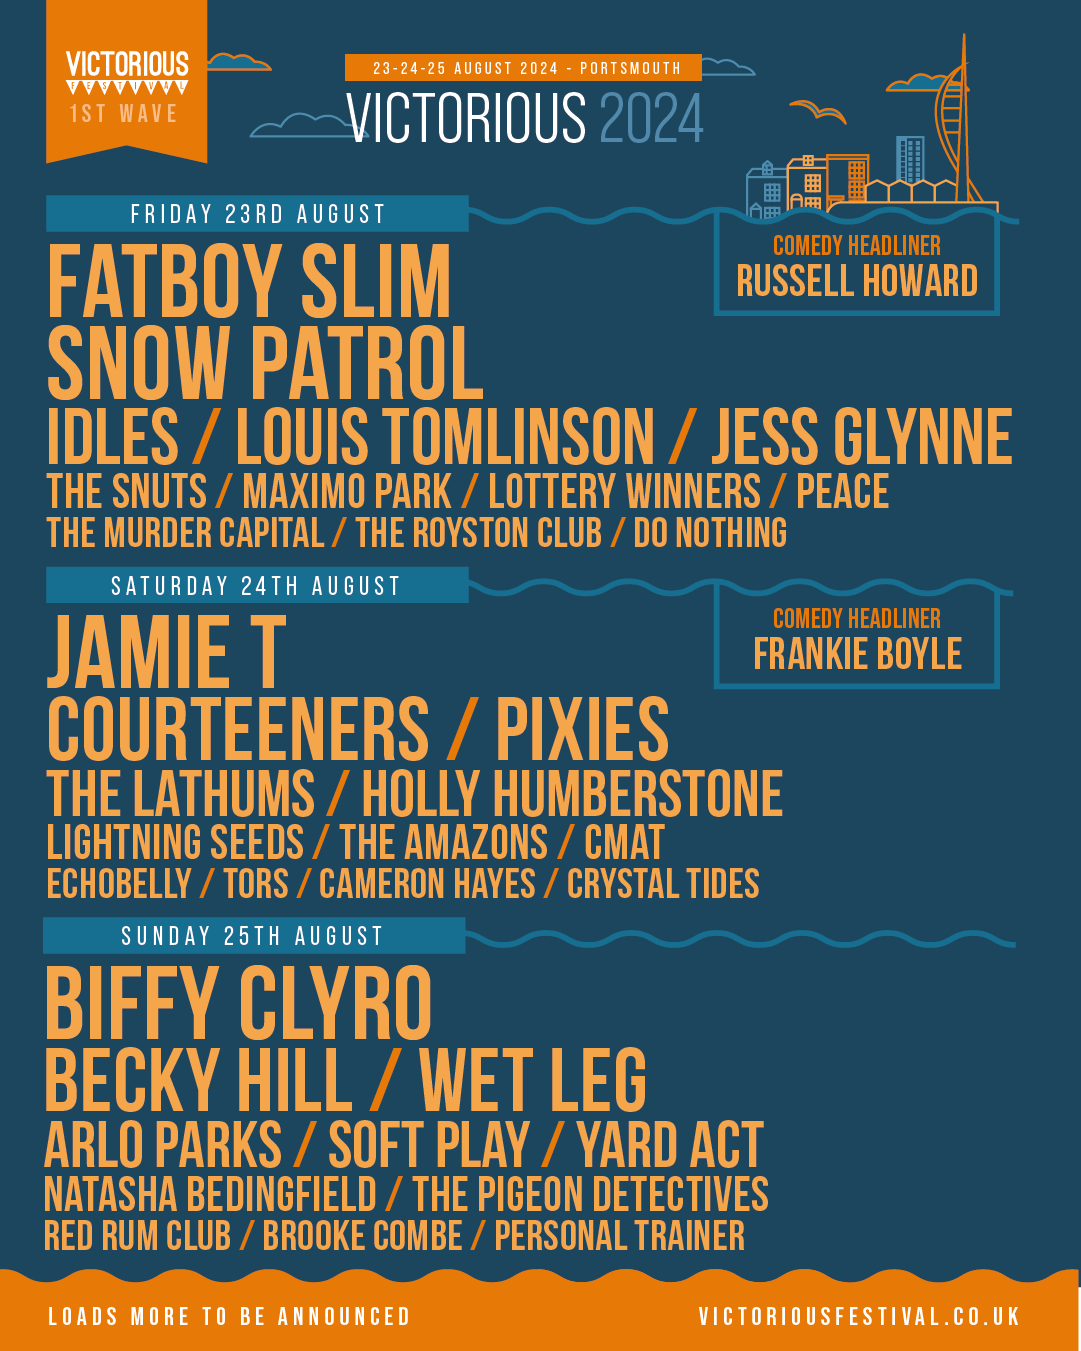 The 1st Wave of acts for Victorious Festival 2024 has officially been